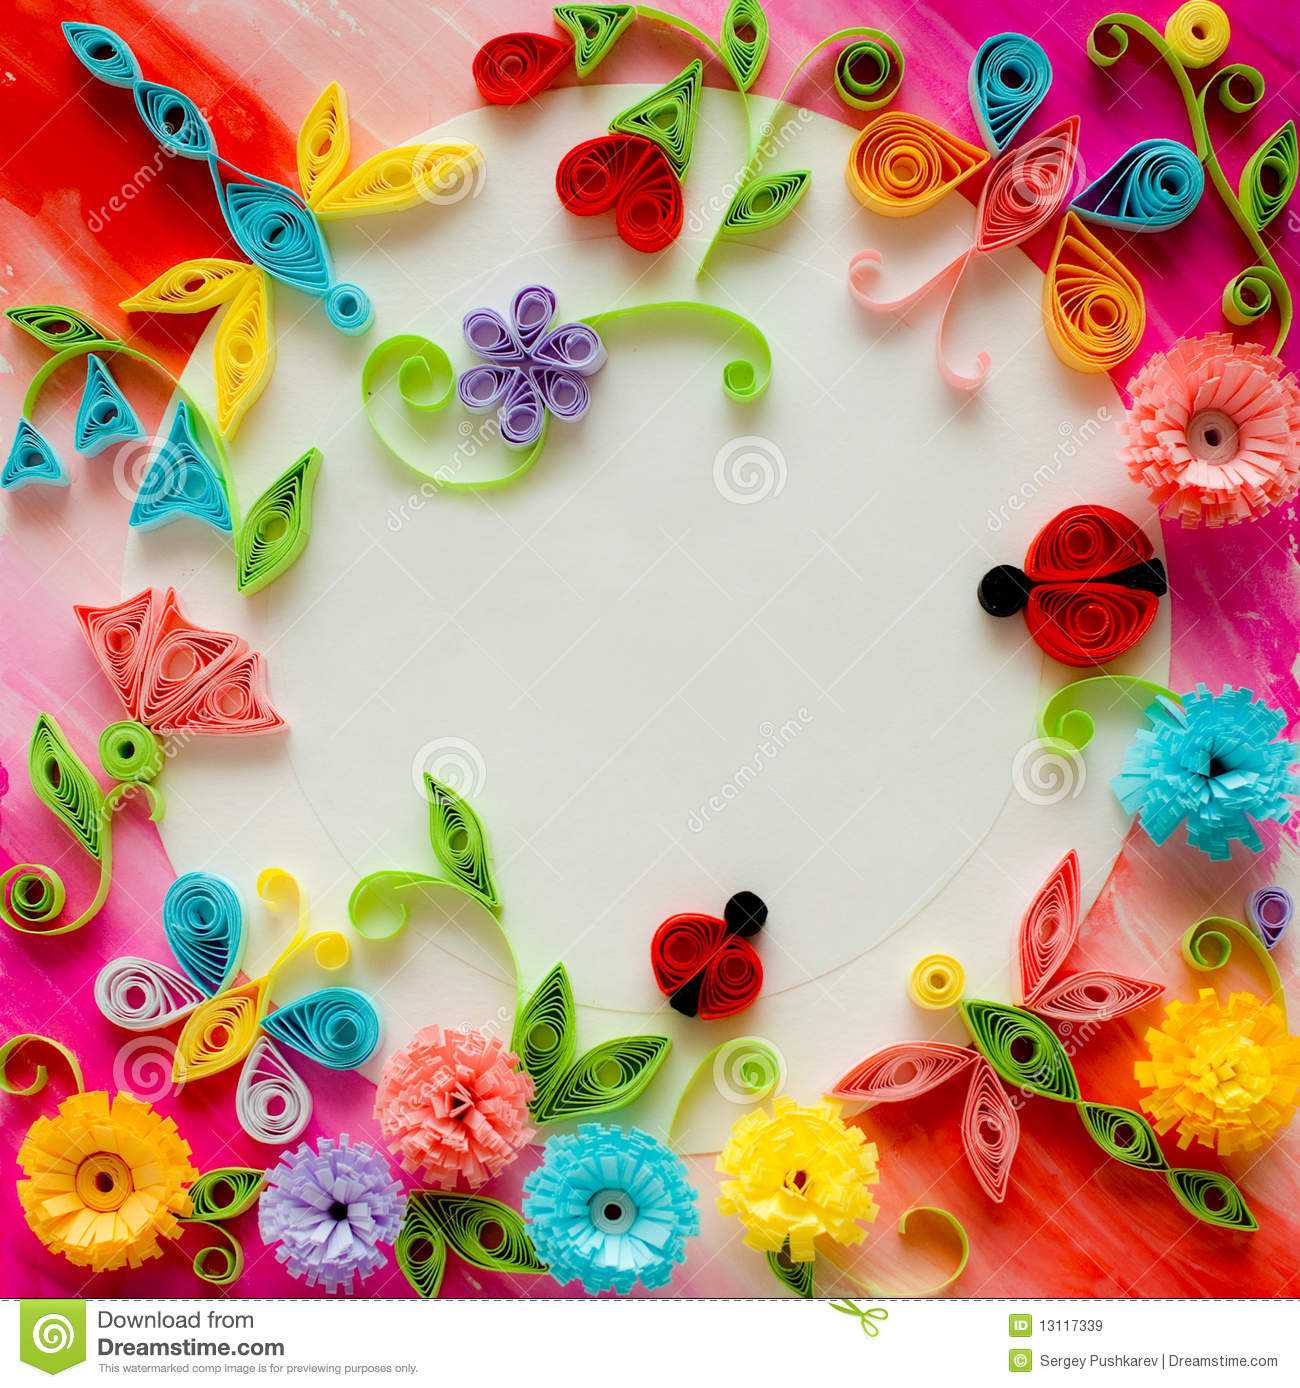 Quilling Greeting Card Blank Template Stock Image – Image Of Within Free Blank Greeting Card Templates For Word